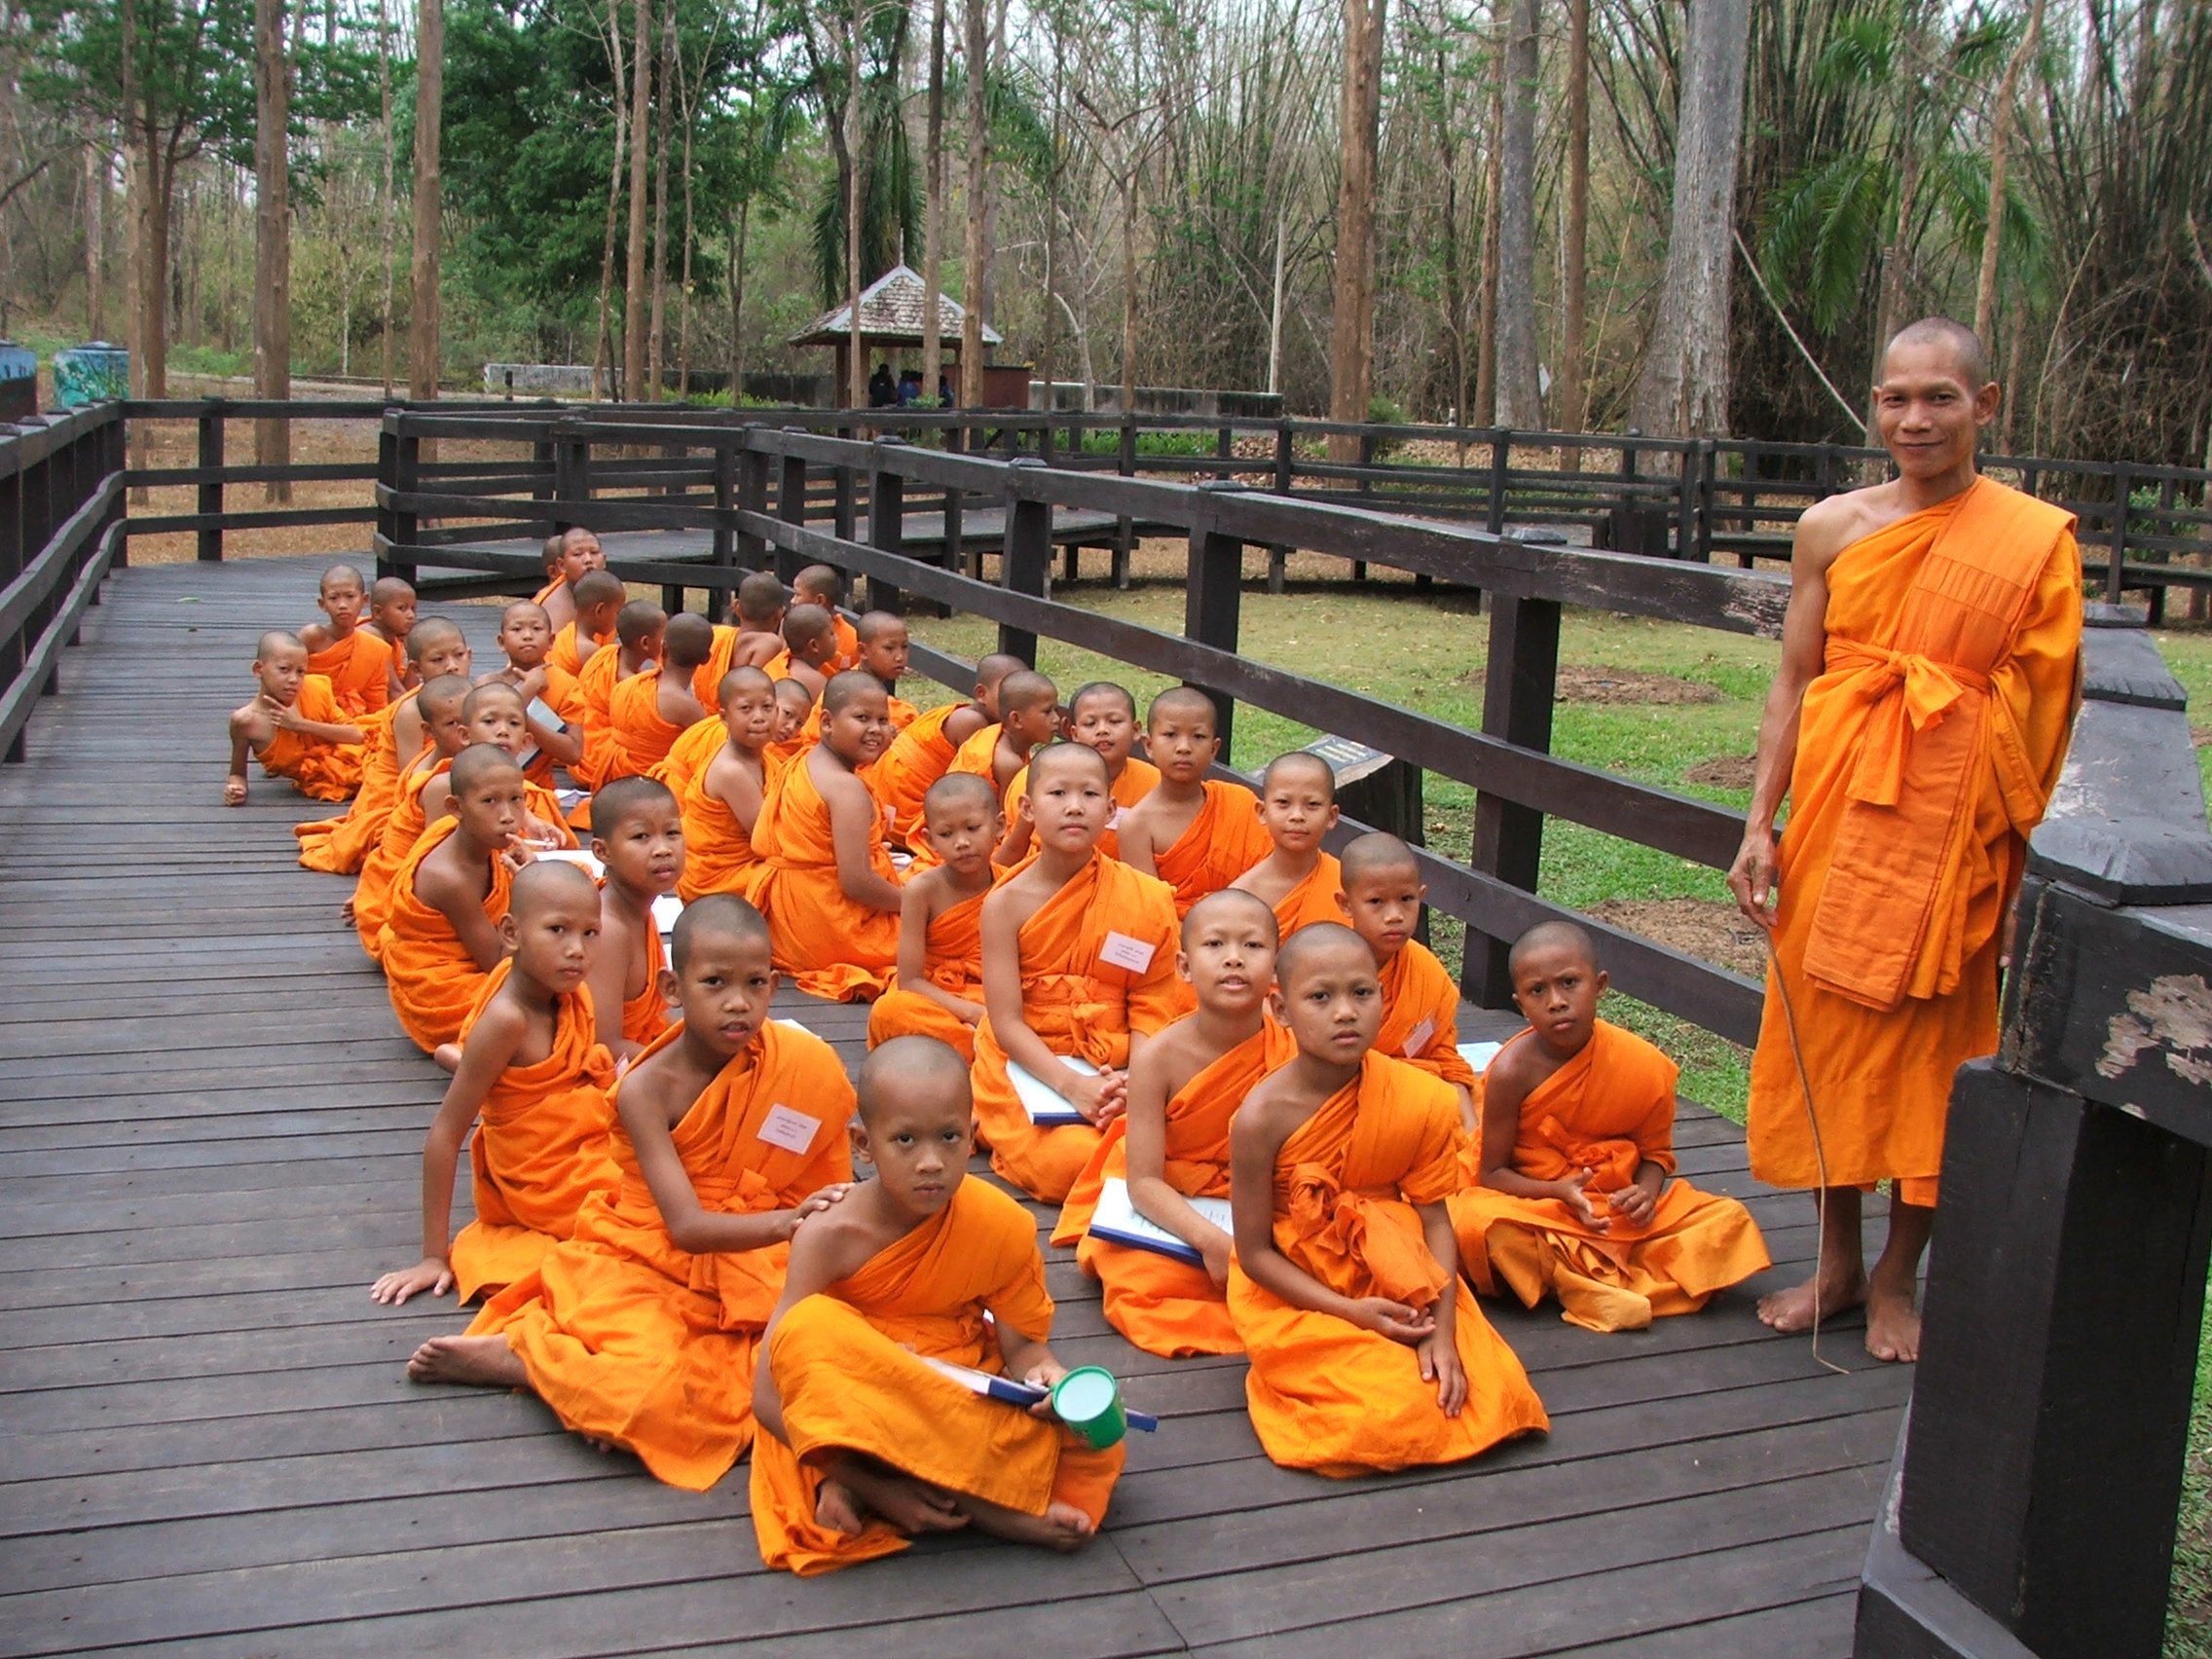 Novice in the Buddhist religion group